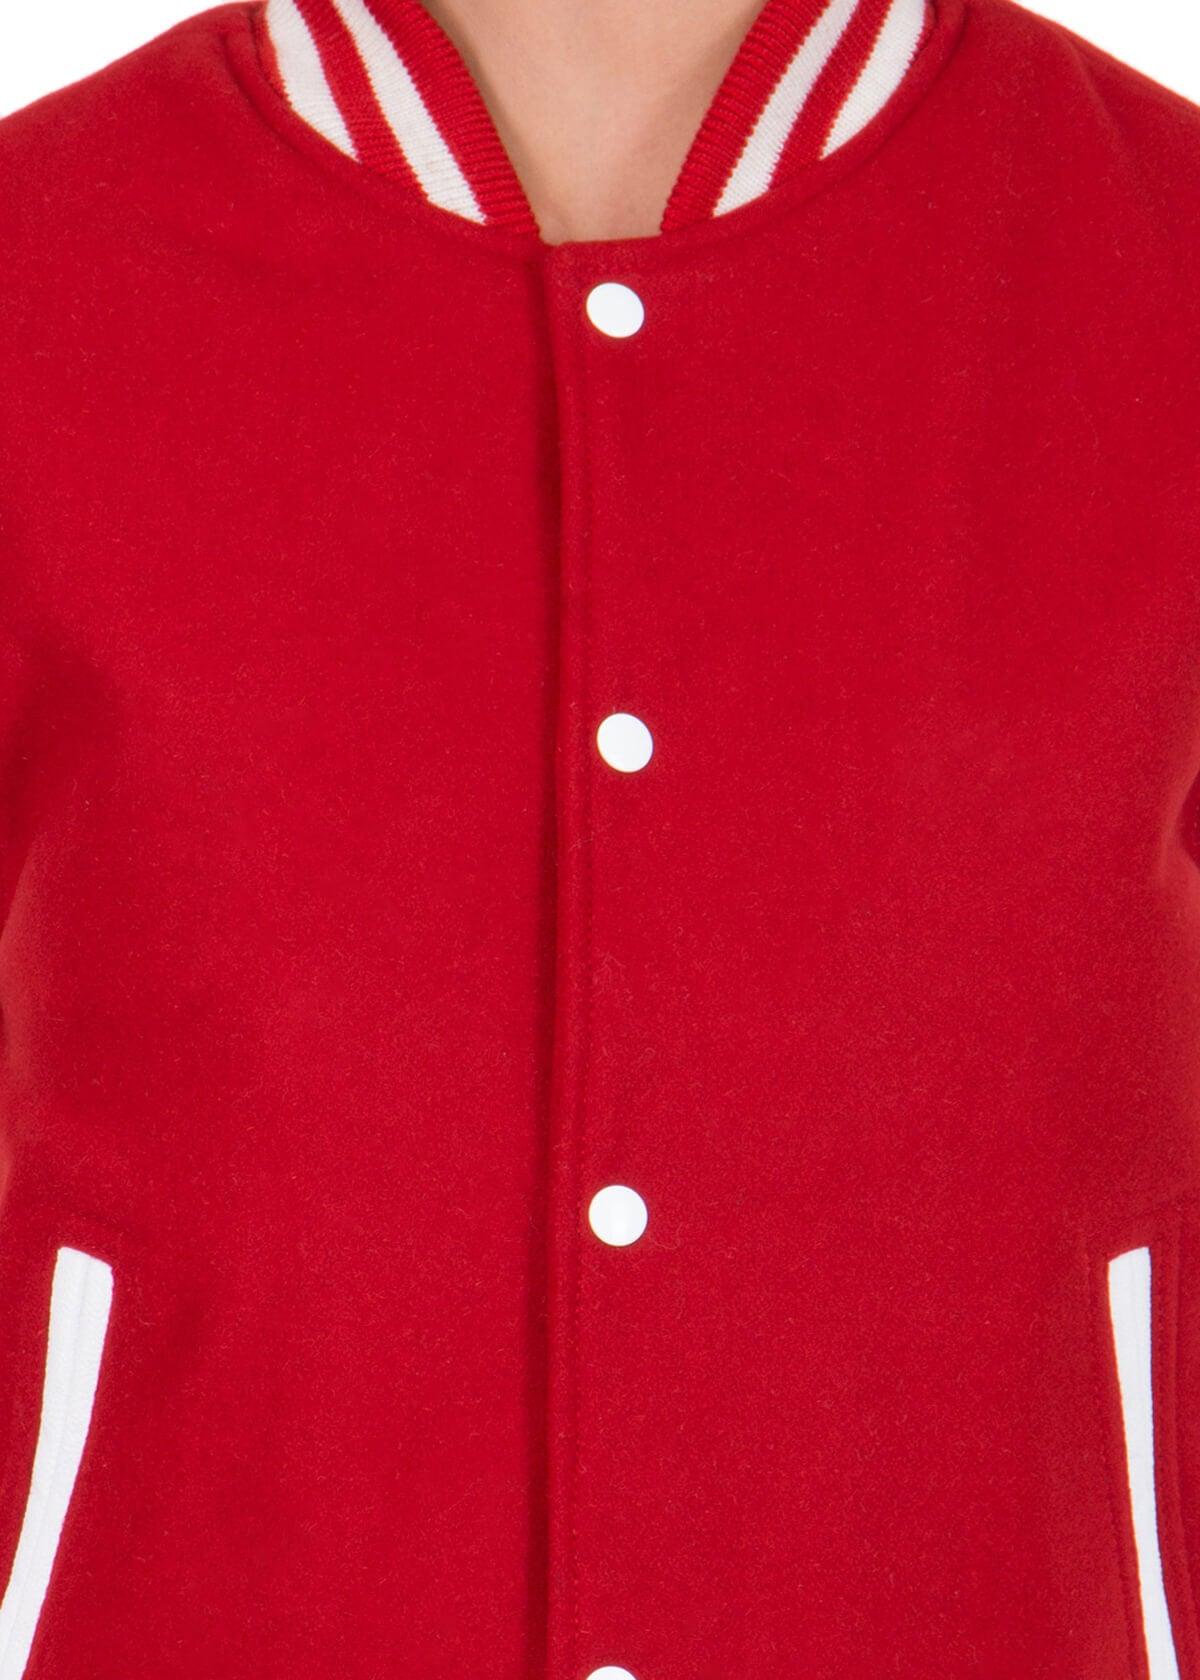 Womens Scarlet Red Varsity Jacket with White Leather Sleeves-8